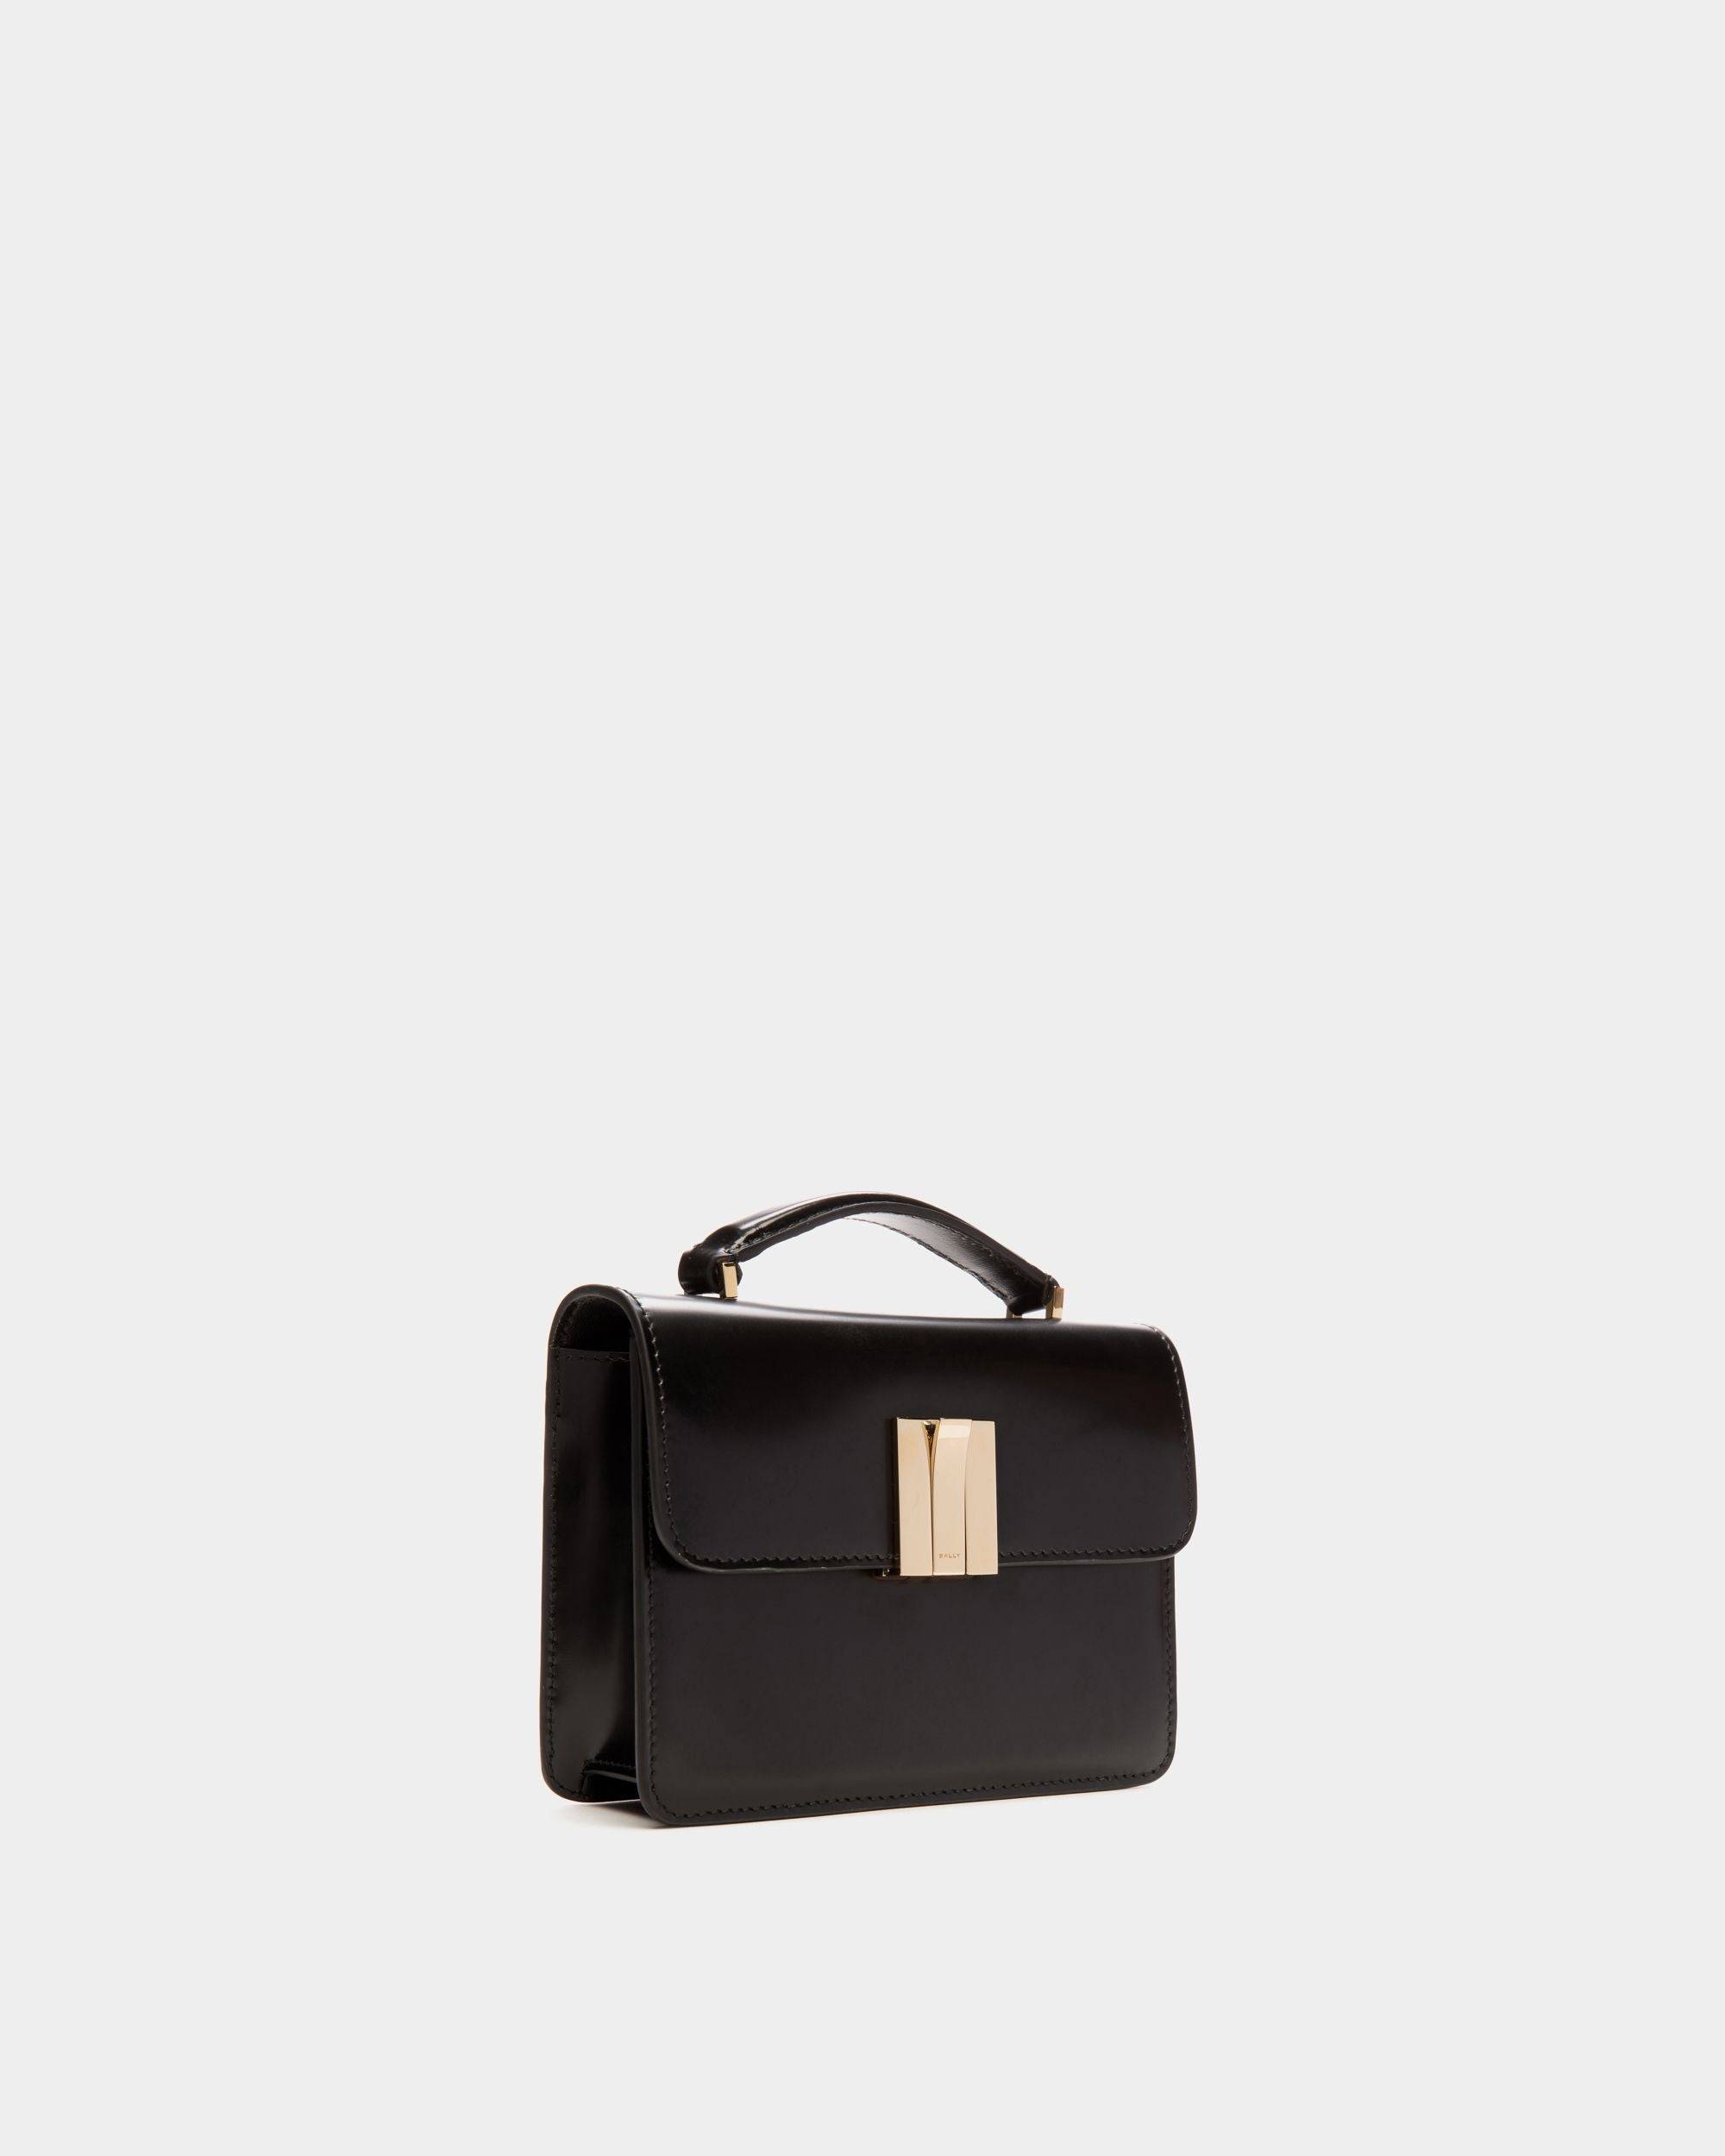 Ollam | Women's Mini Top Handle Bag in Black Brushed Leather | Bally | Still Life 3/4 Front